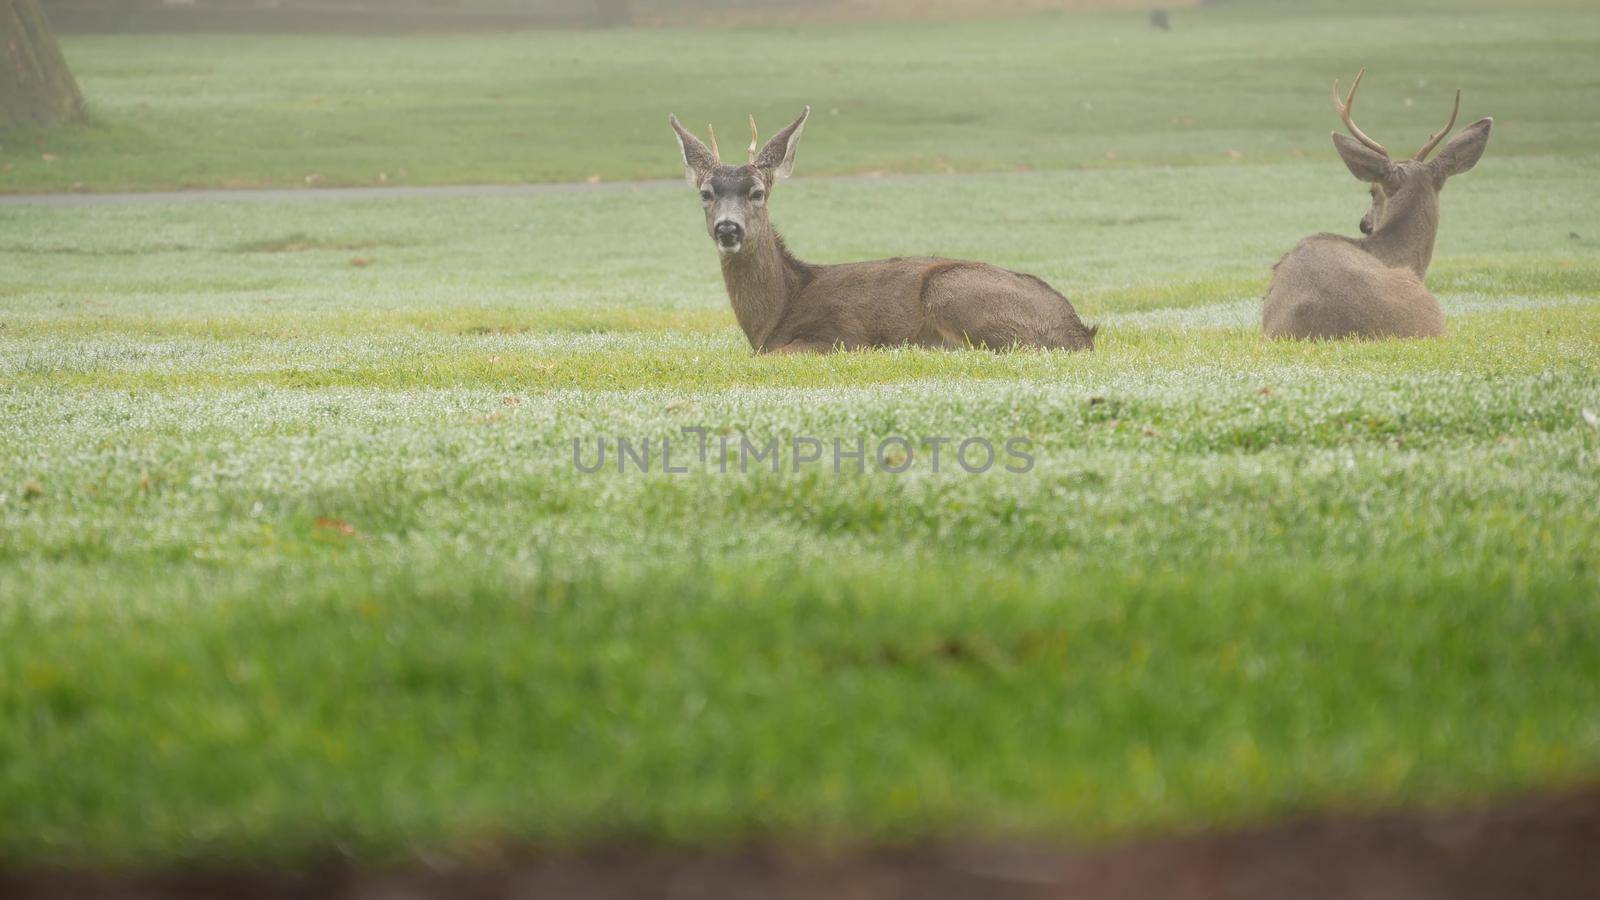 Two wild deers male with antlers and female grazing on green lawn in foggy weather. Couple or pair of animals on grass, Monterey wildlife, California nature, USA. Herbivore hoofed mammals with horns.